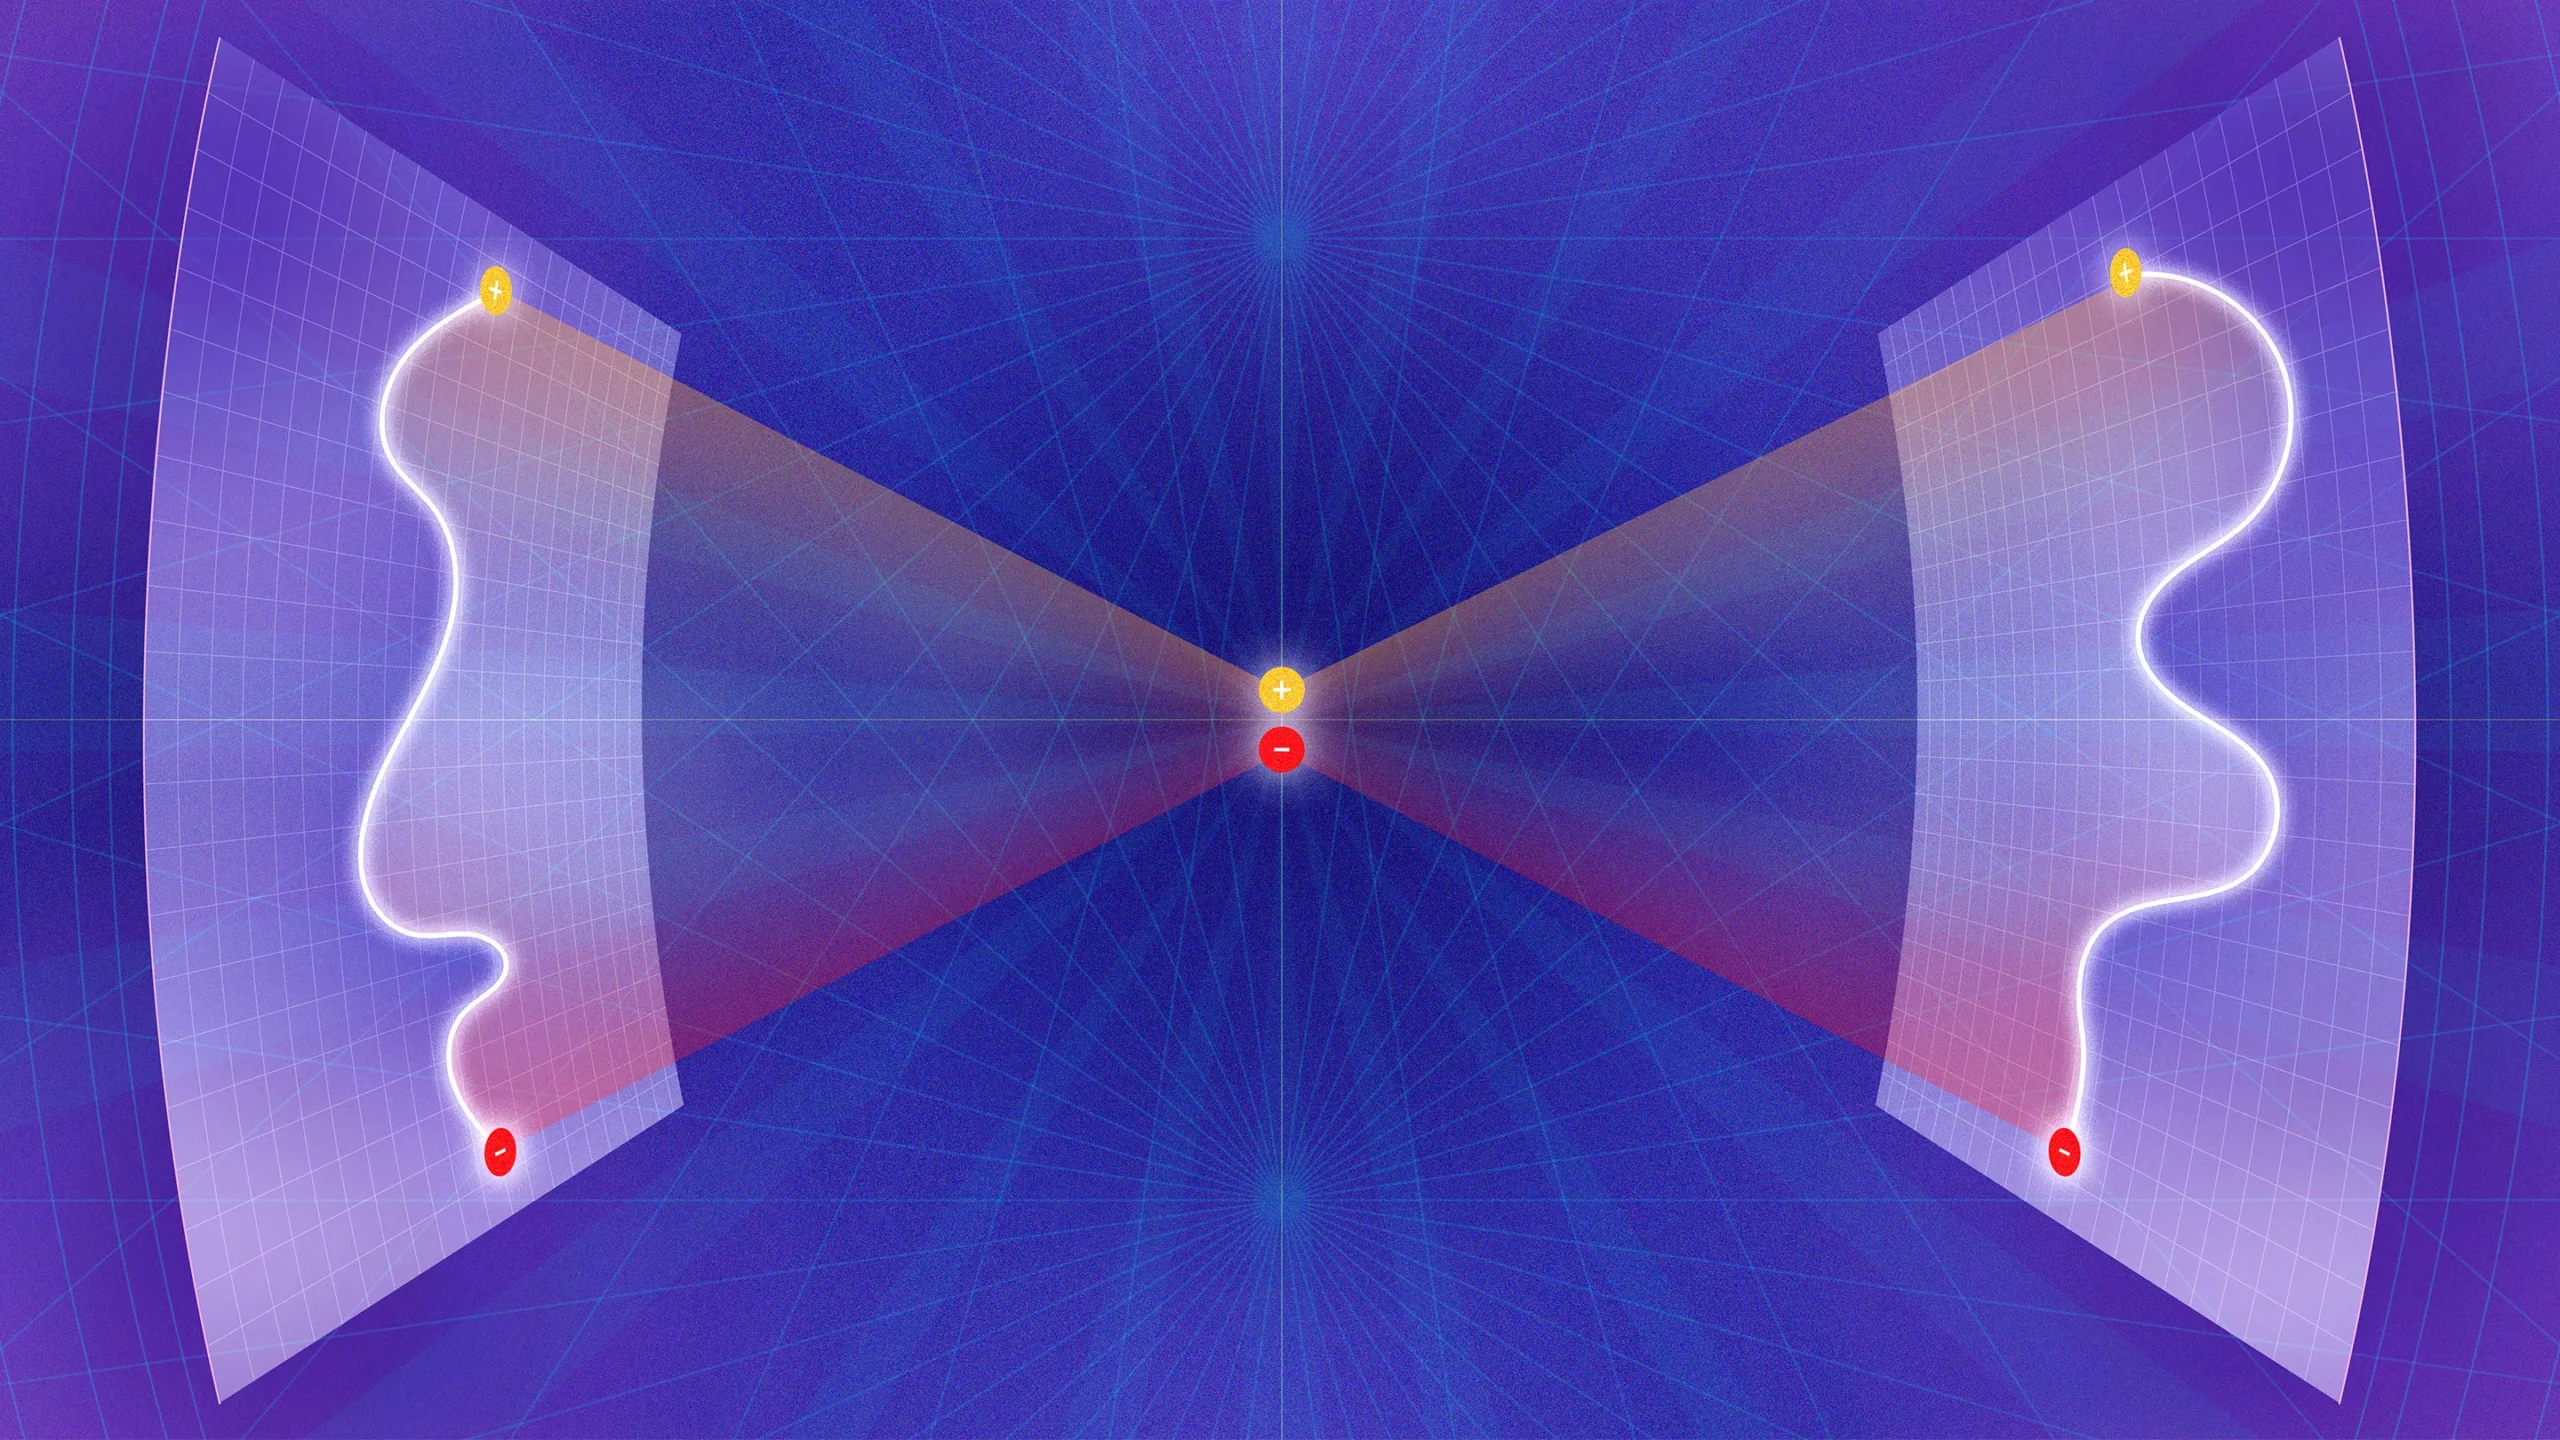 A New Kind of Symmetry Shakes Up Physics